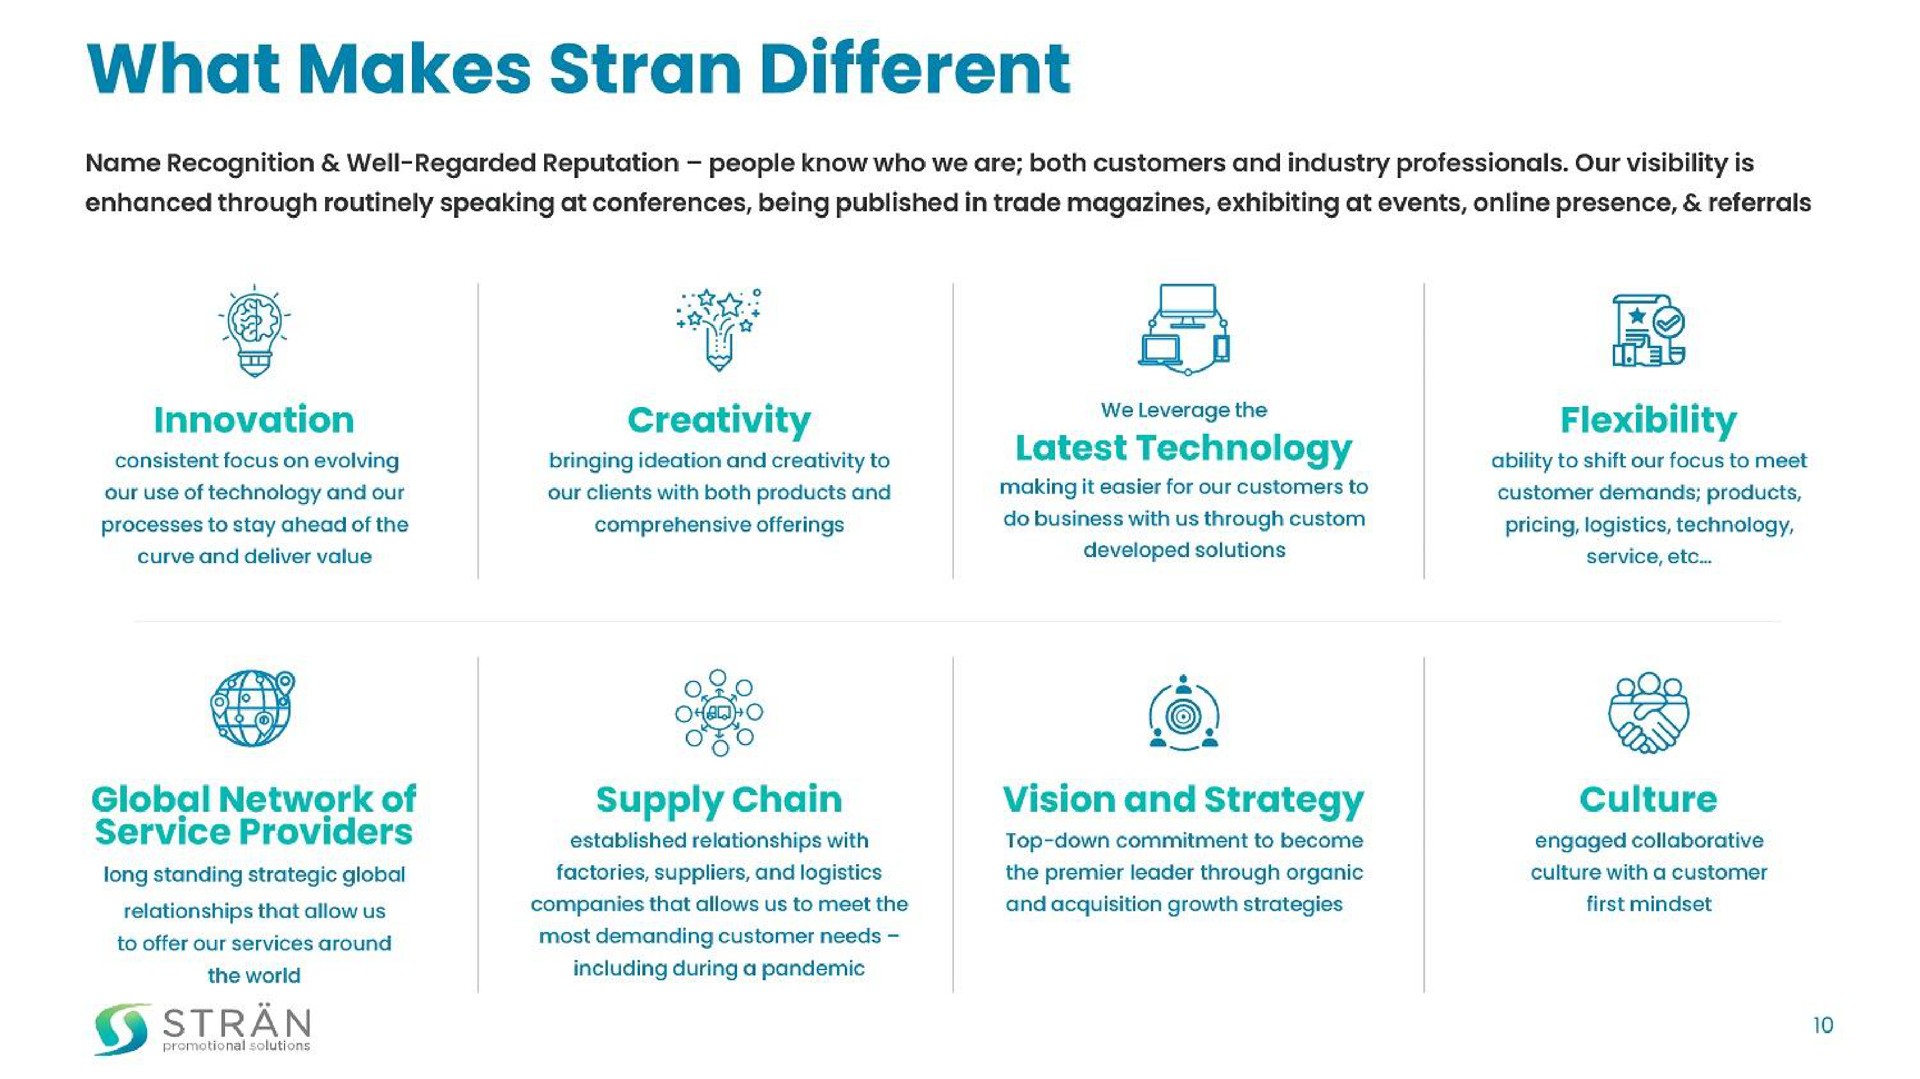 what makes different | Stran & Company